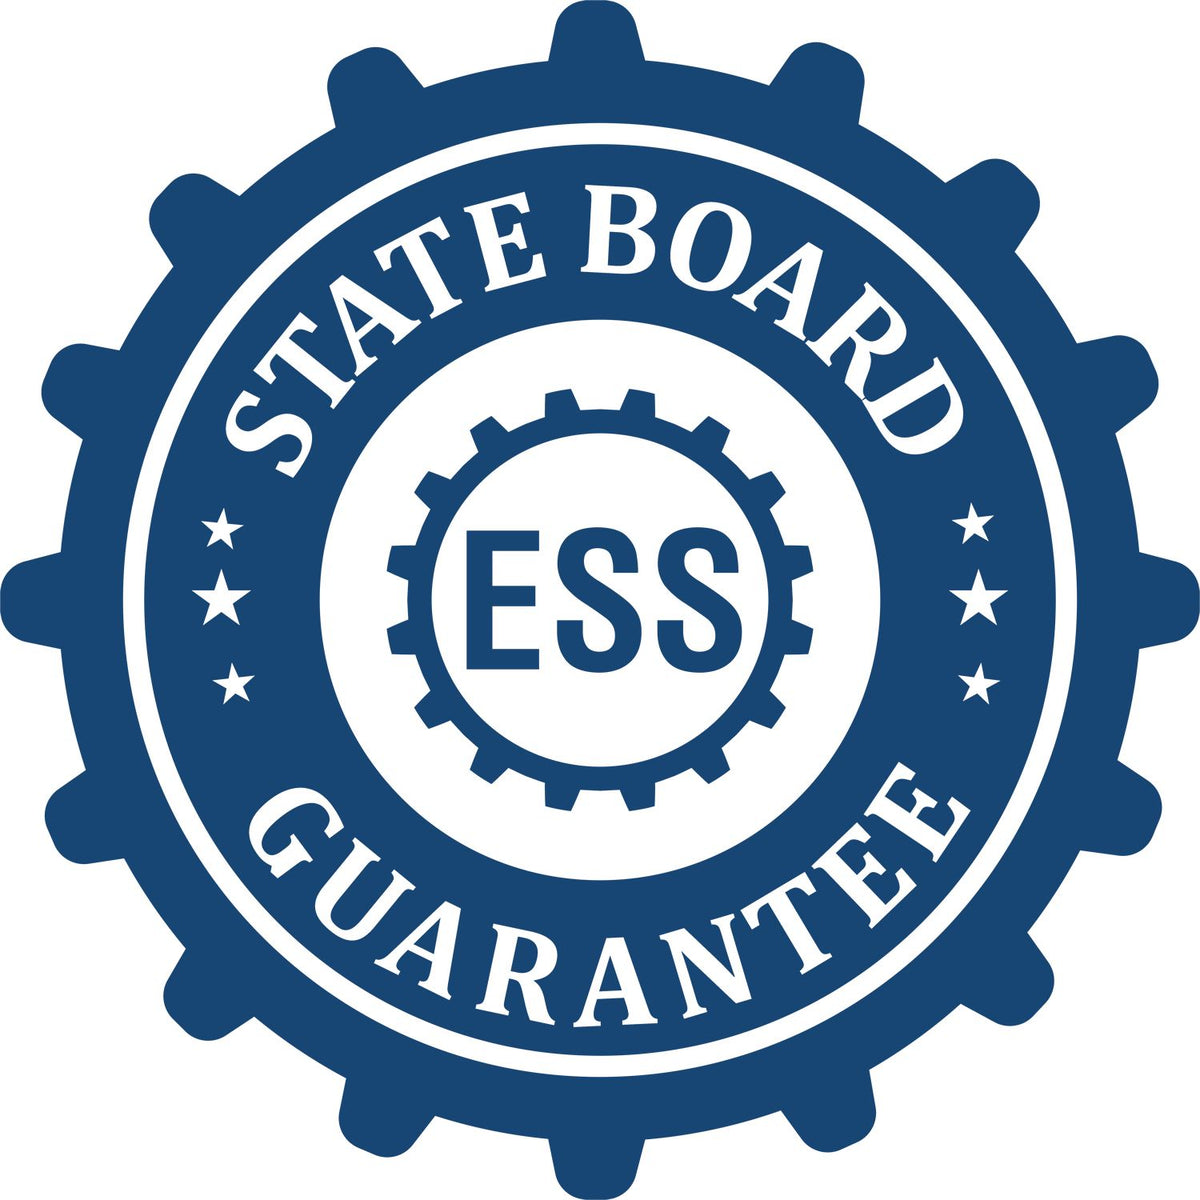 An emblem in a gear shape illustrating a state board guarantee for the Gift Colorado Architect Seal